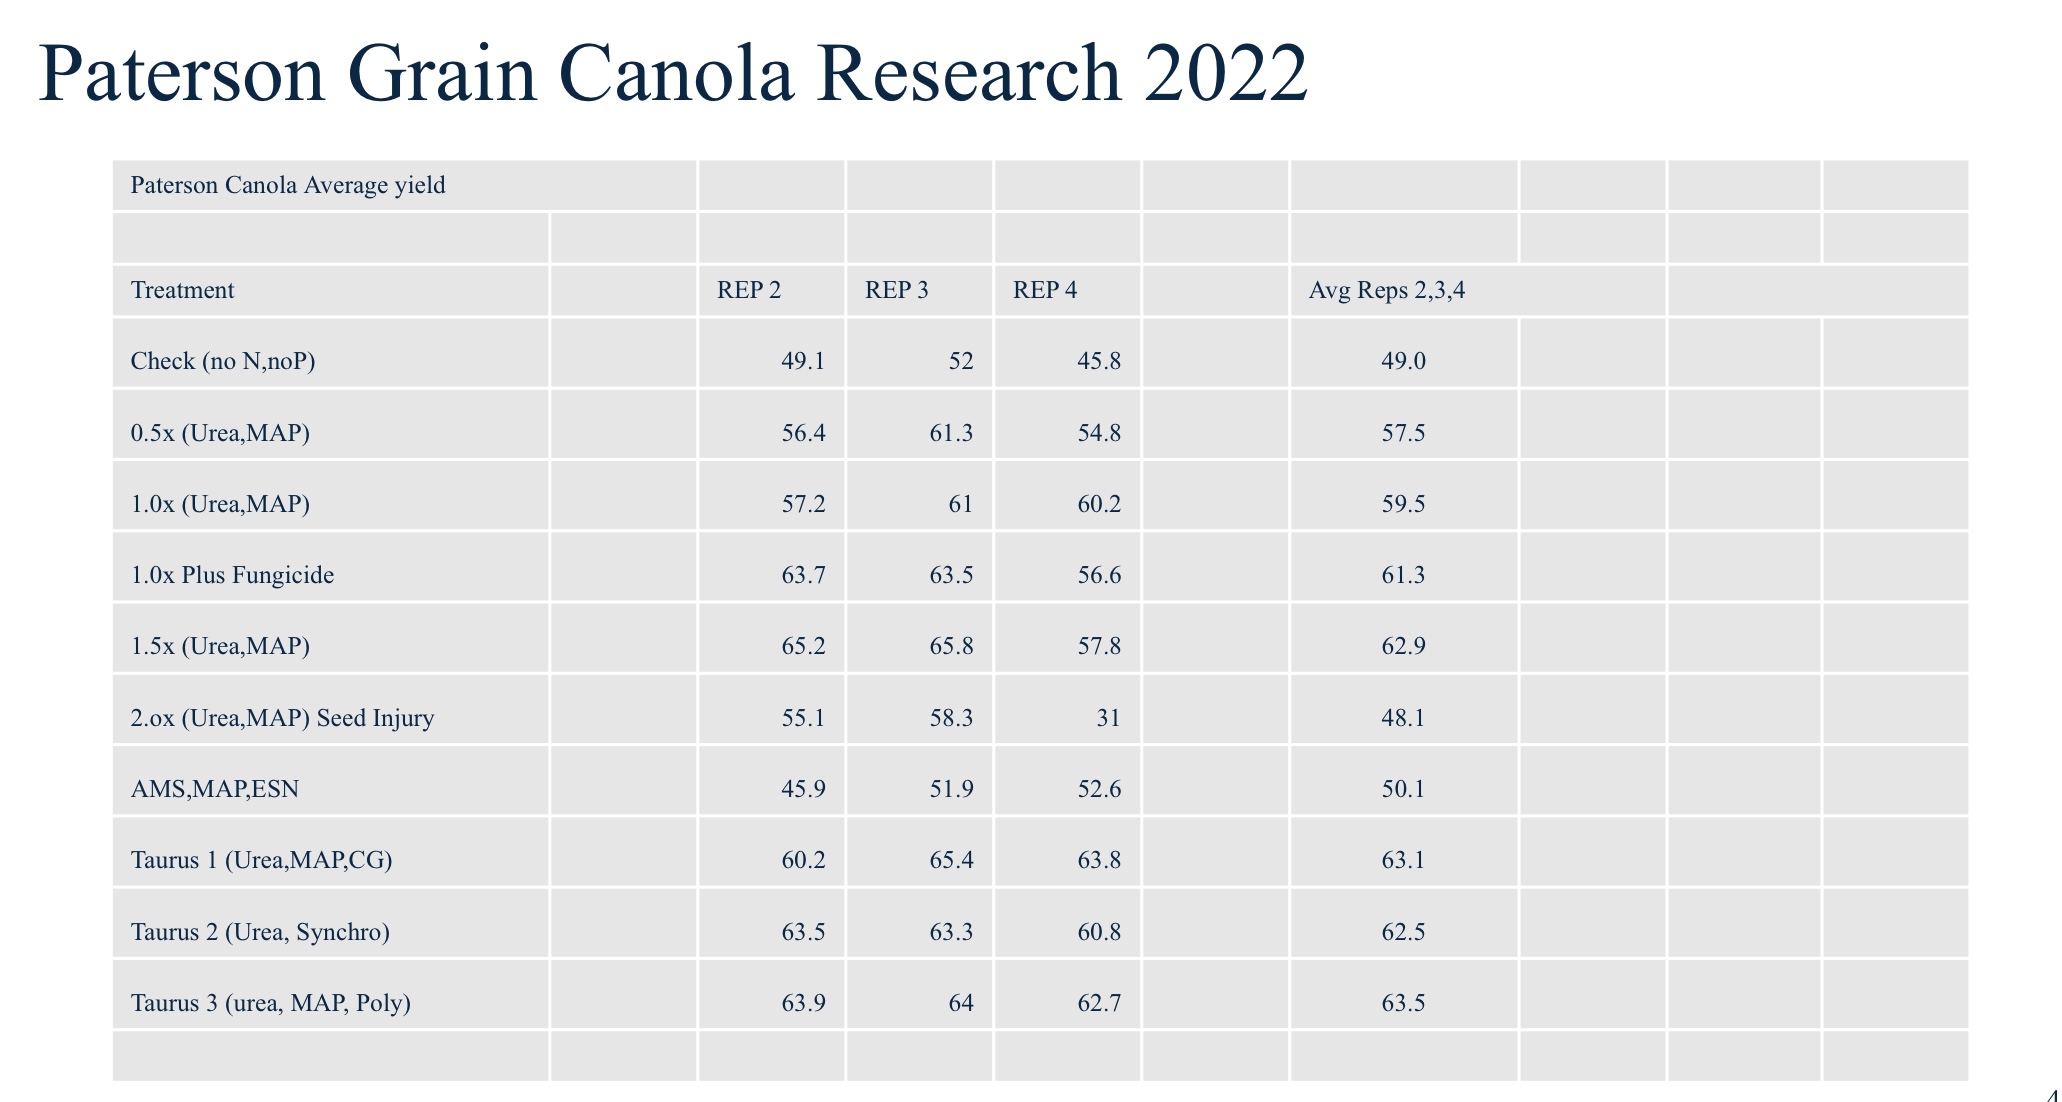 CANOLA REASEARCH from Patterson Grain in 2022 testing polysulphate against other fertilizers